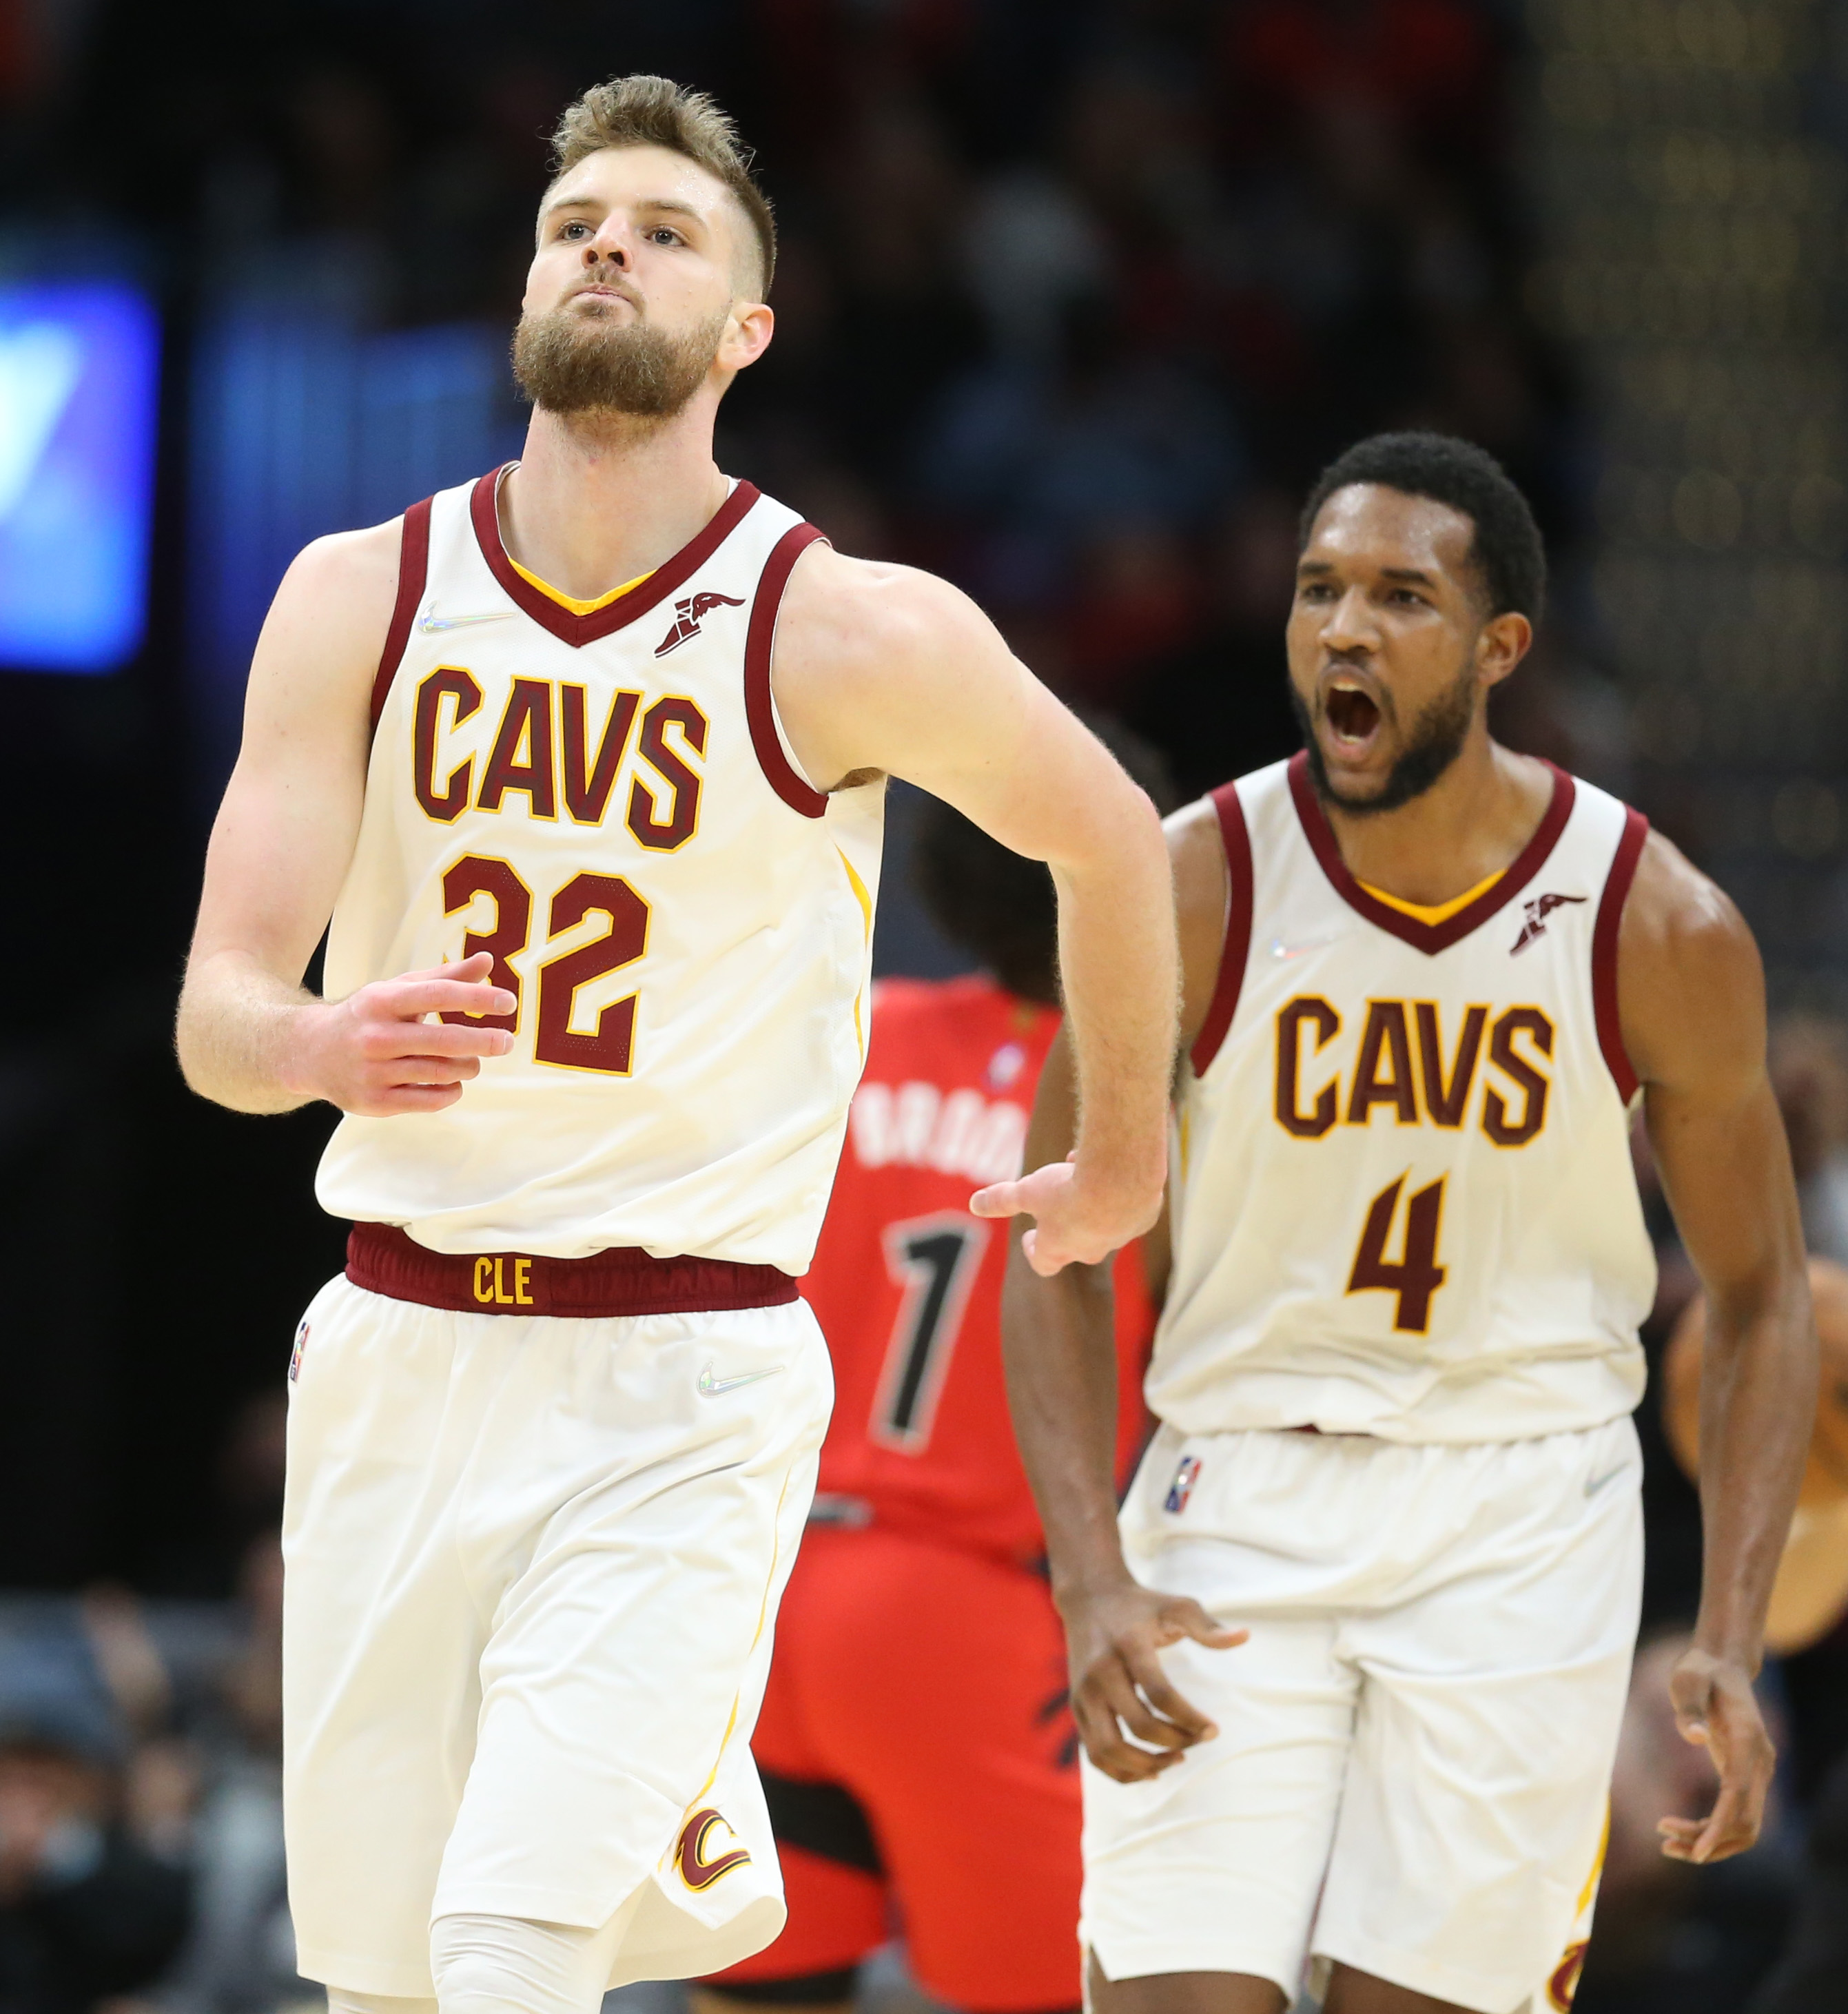 Cavs' Wade Undergoes Knee Surgery, Out For Season